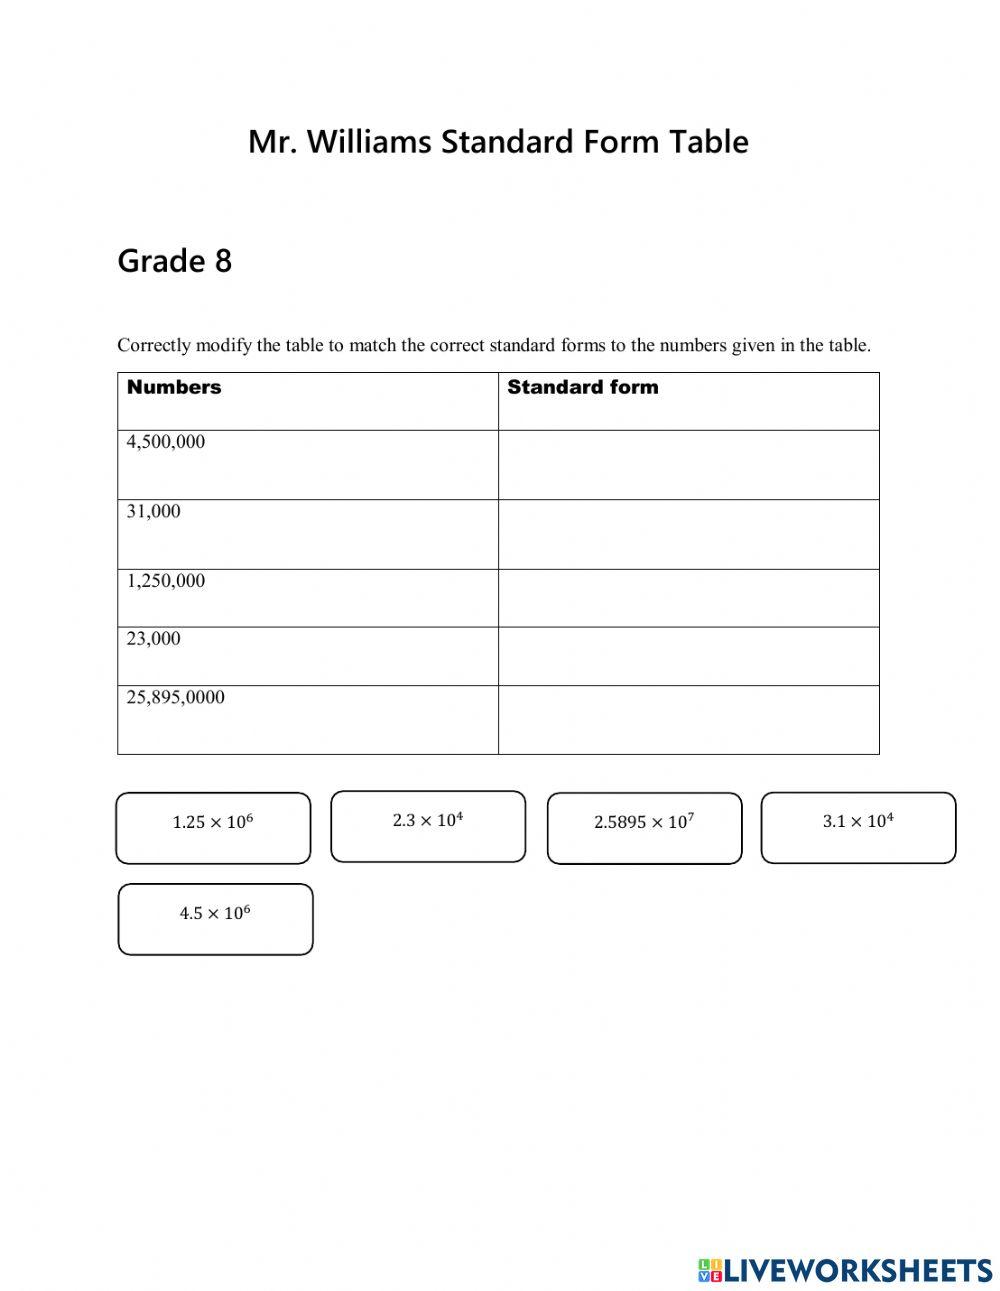 Mr. Williams Standard form table simple activity